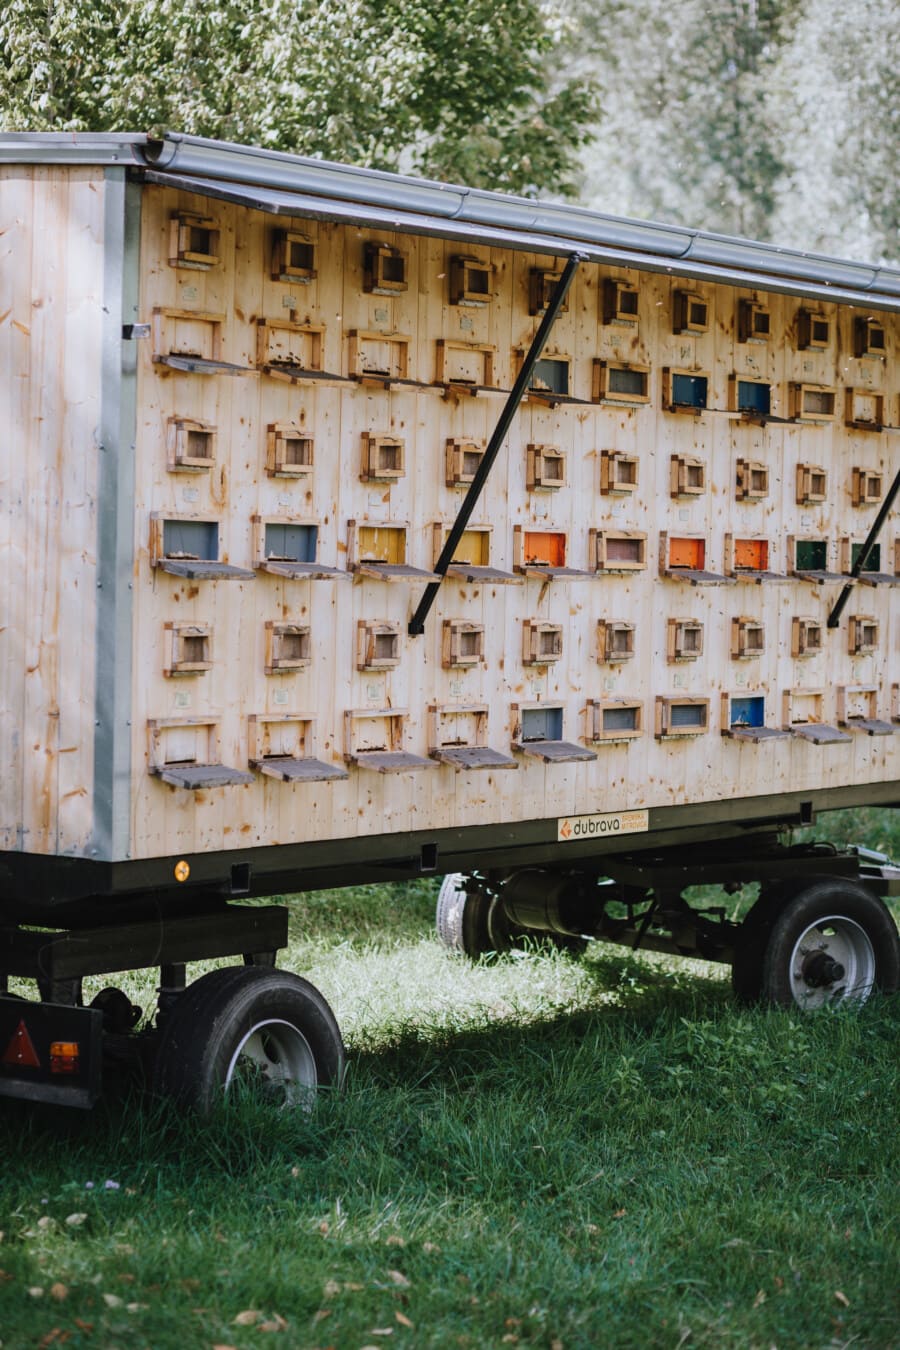 beehive, truck, trailer, boxes, vehicle, transport, cargo, wagon, industry, outdoors